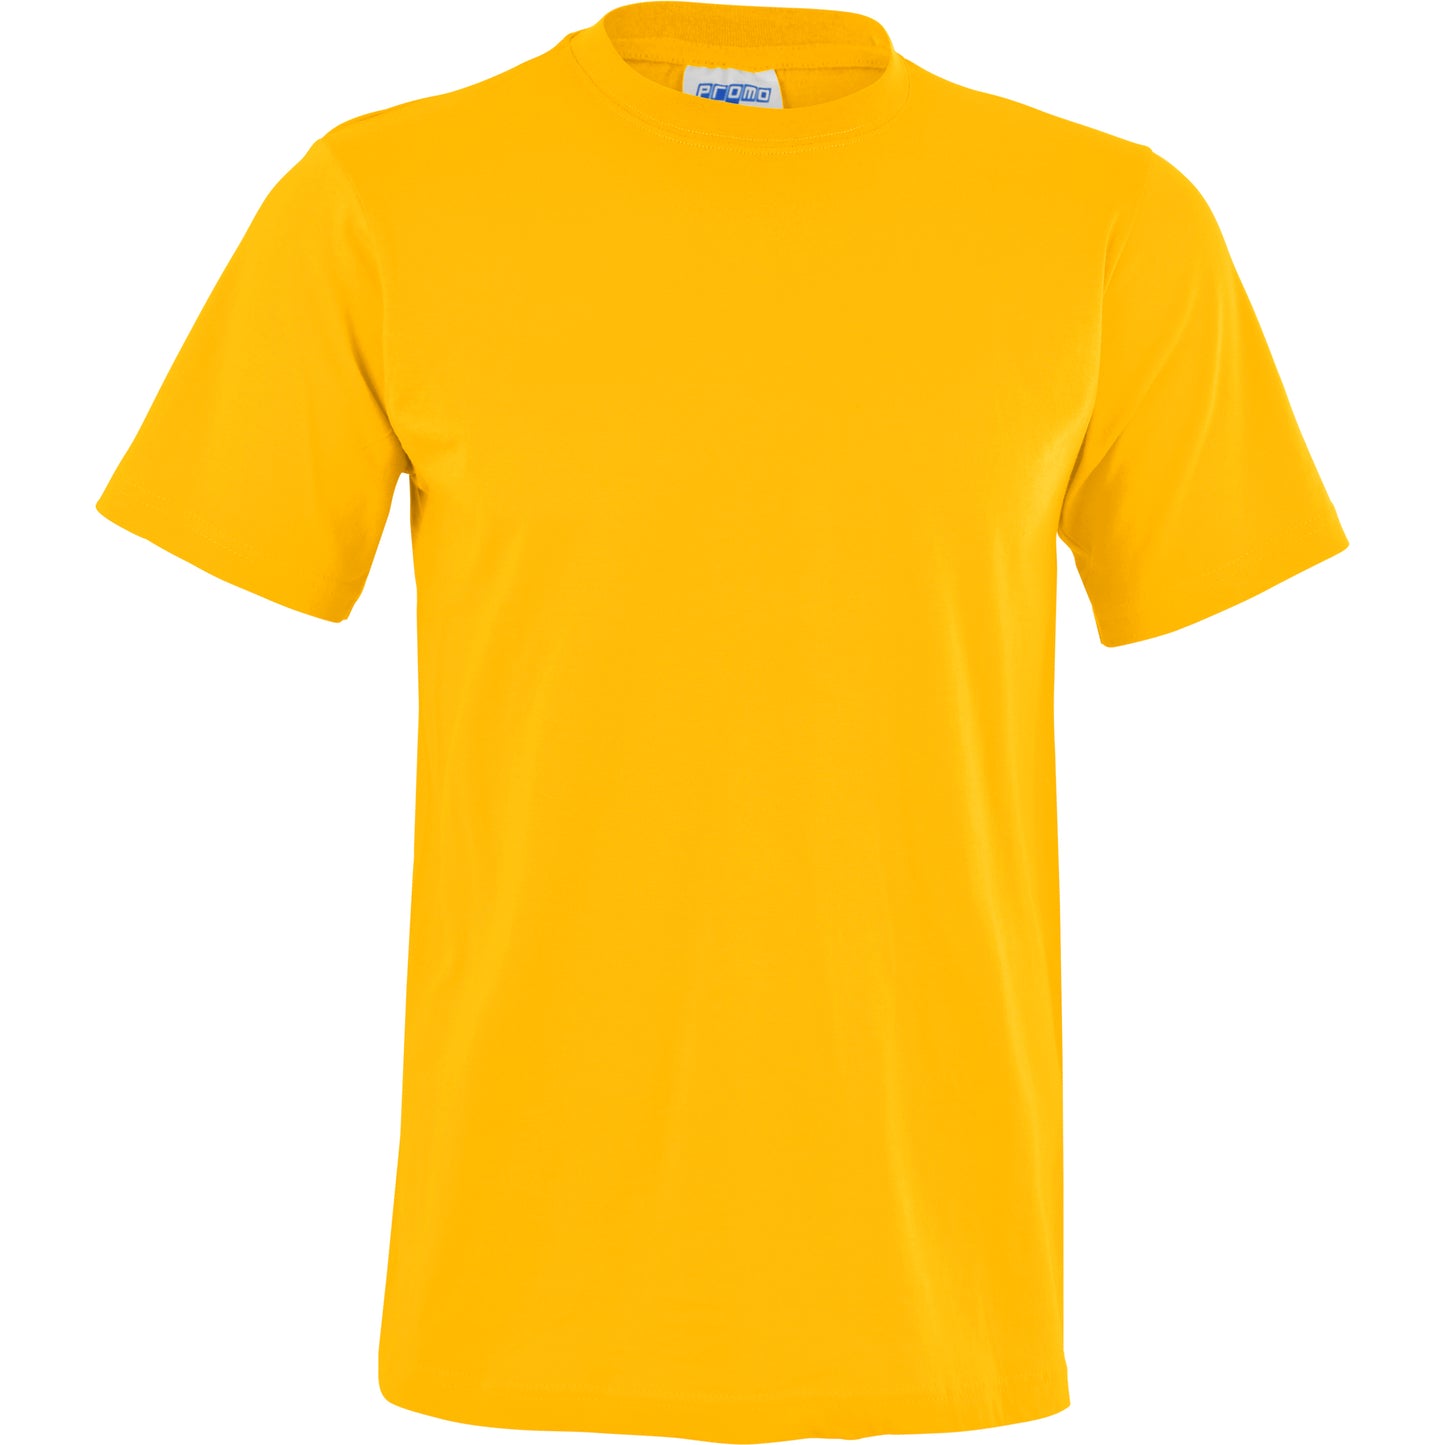 Unisex Promo T-Shirt - Yellow Only